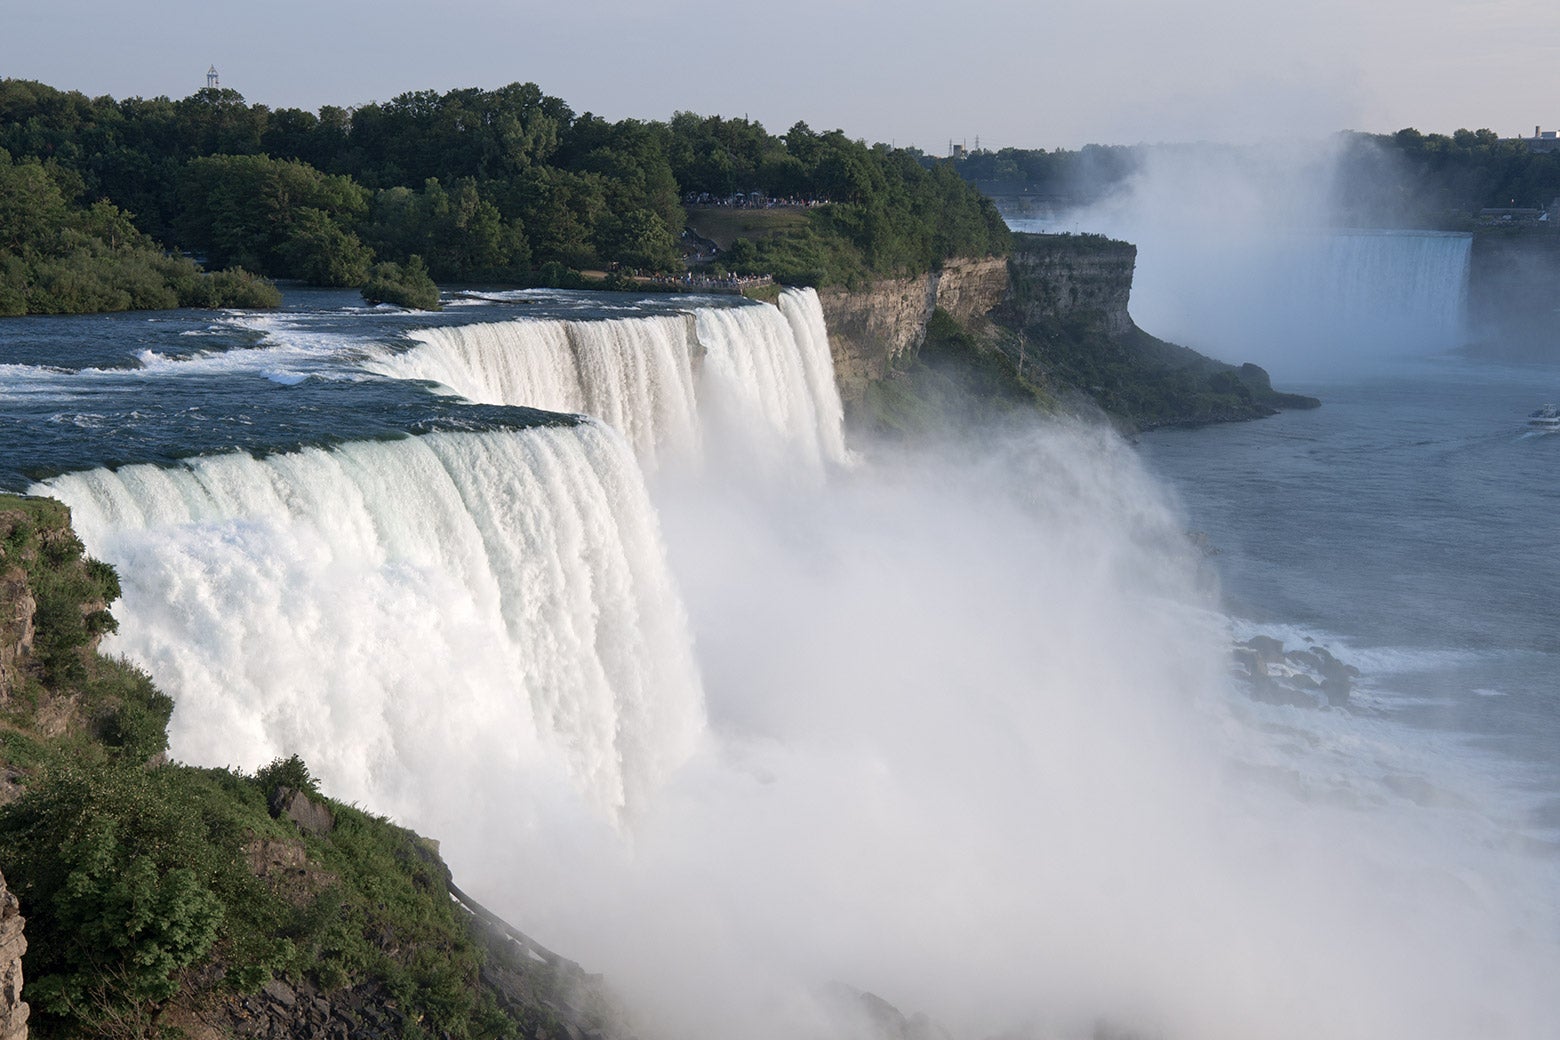 how was niagara falls formed and is niagara falls located in the united states or canada